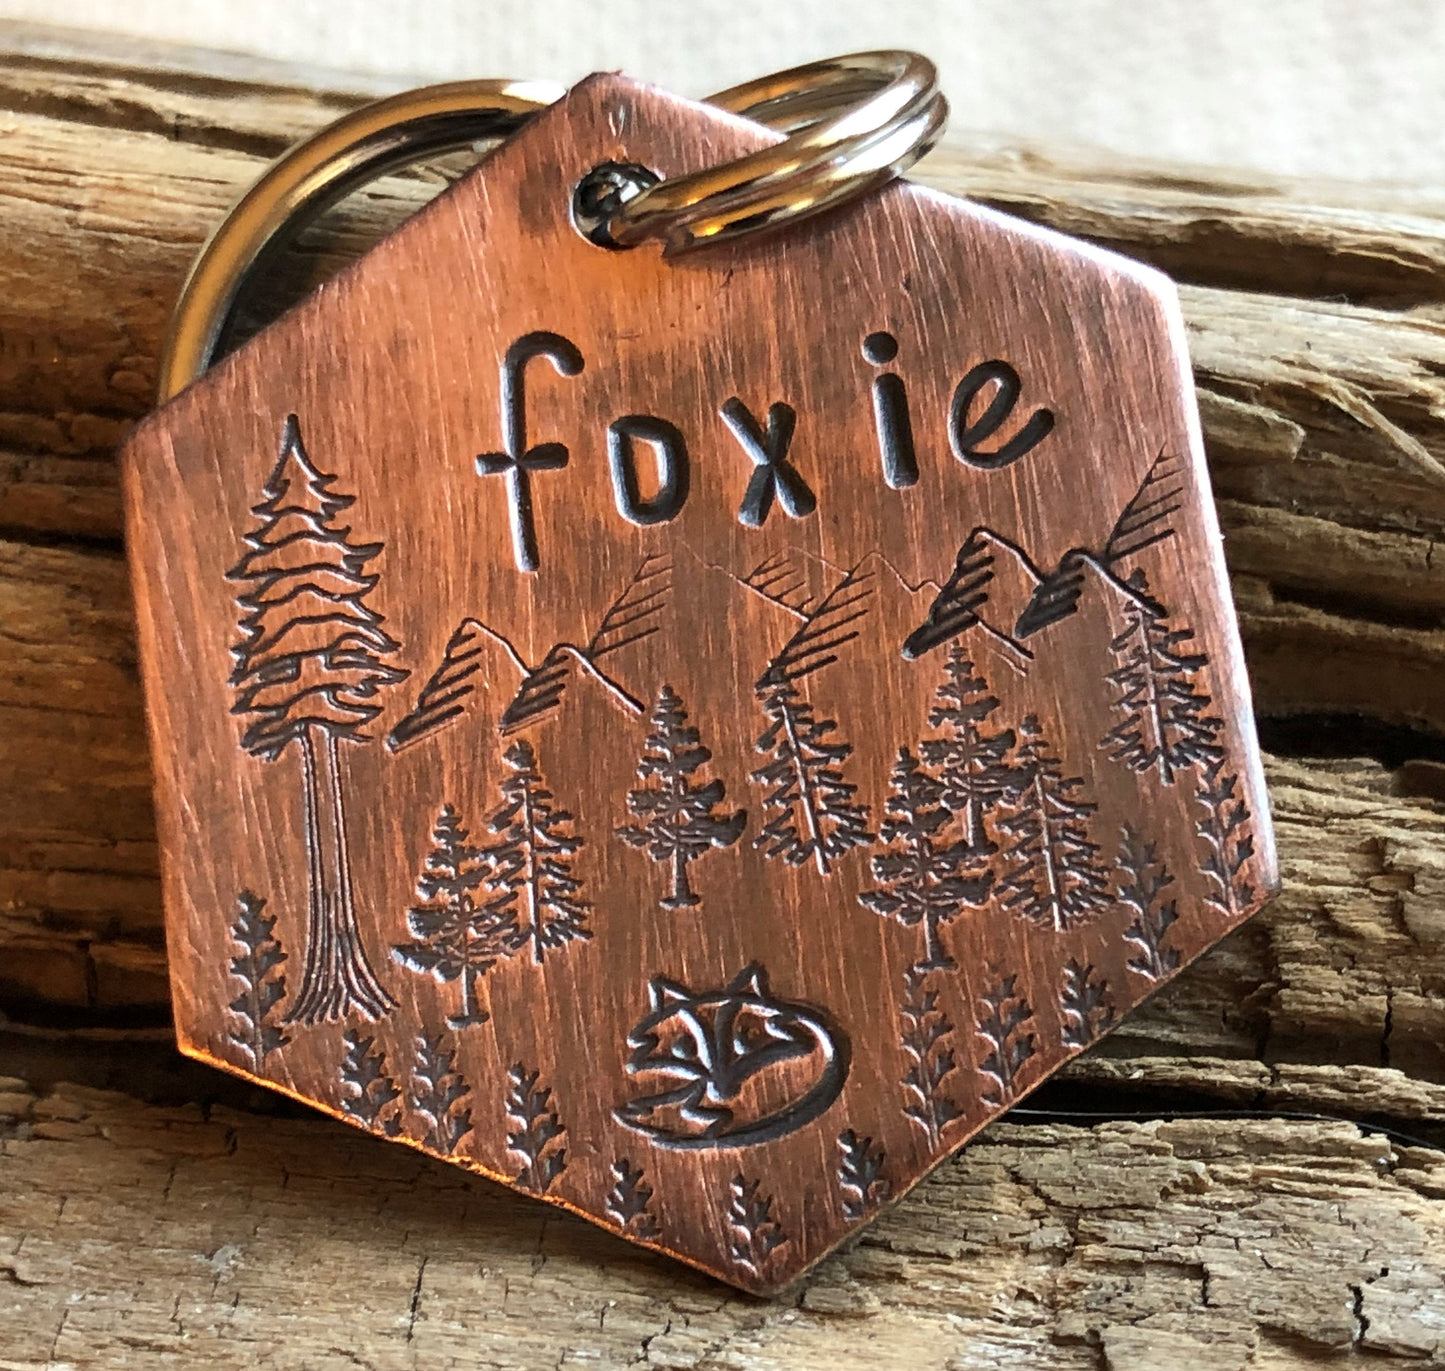 Custom Dog Tag, Foxie, Hand Stamped Dog Tag, Personalized Dog Tag, Mountain Dog Tag, Tag with Fox, Wilderness Tag